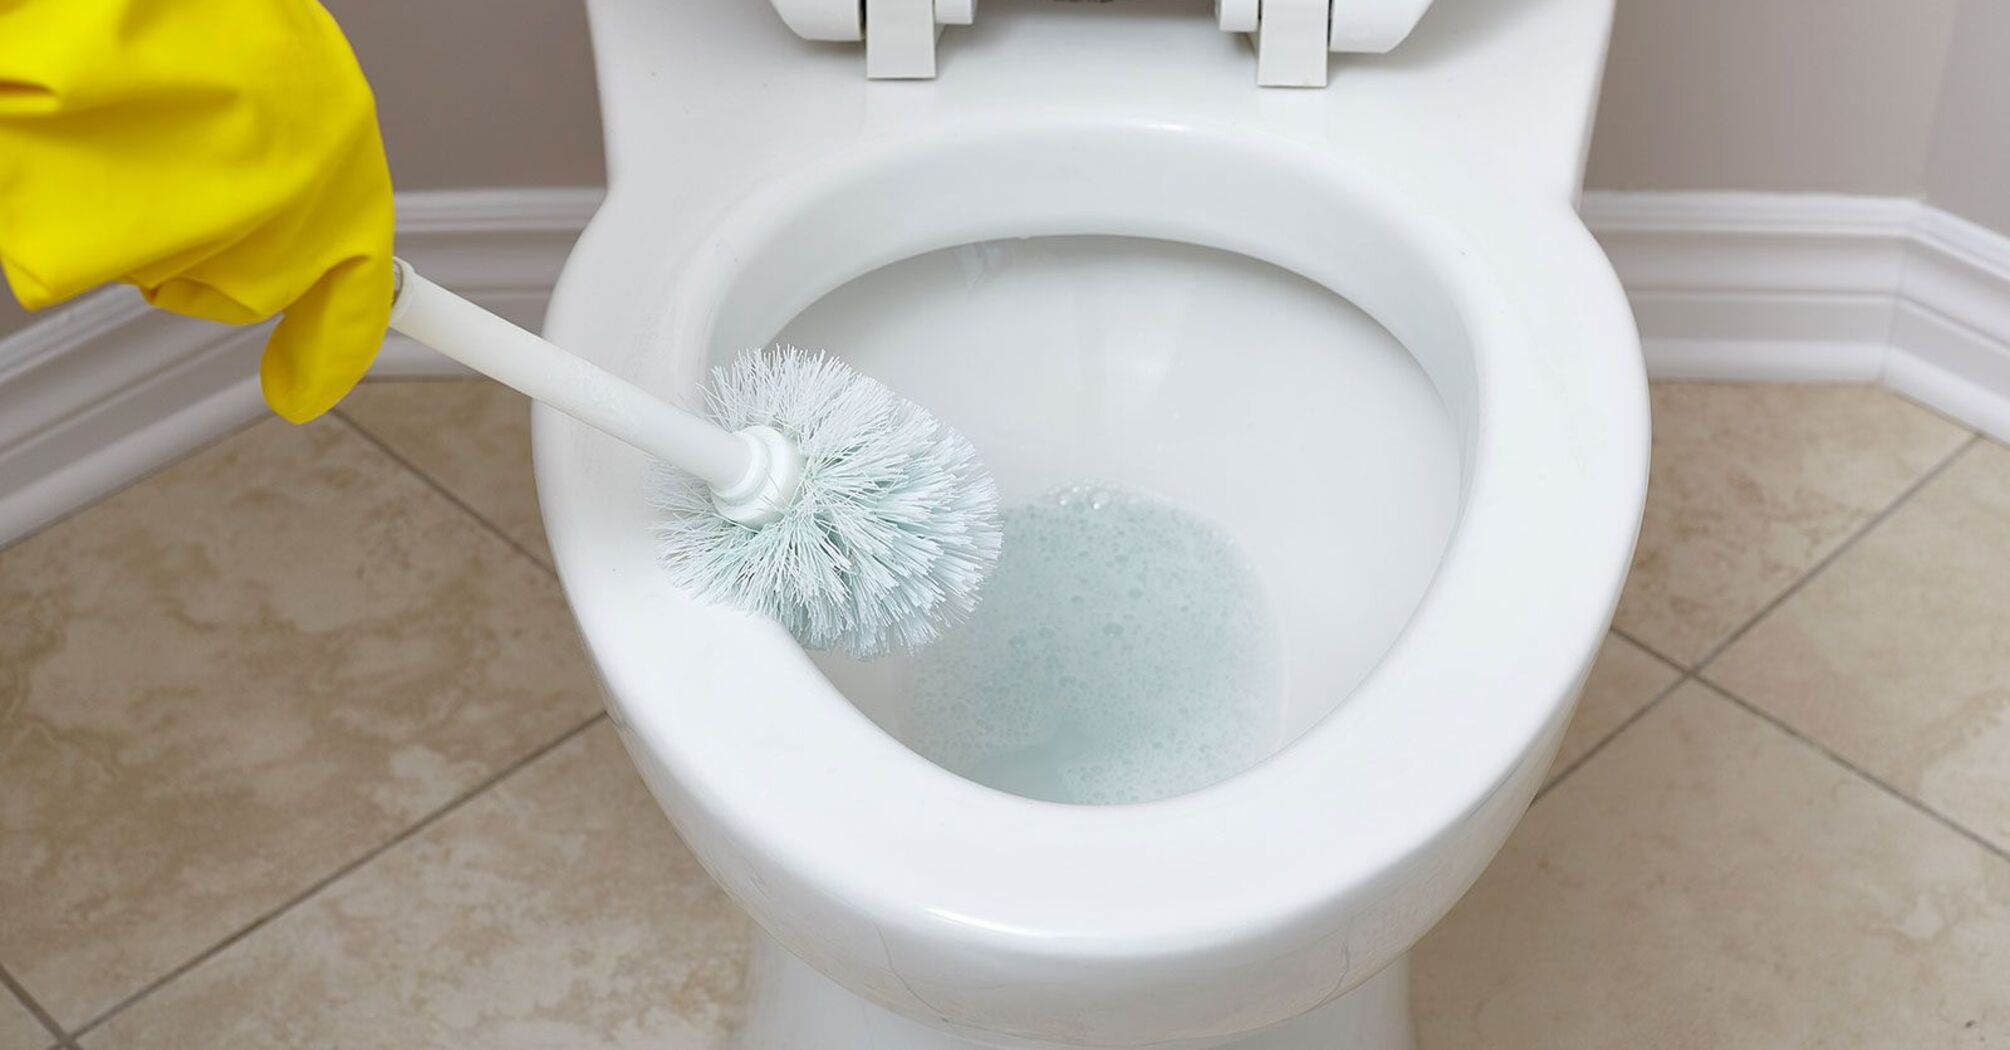 How to whiten the toilet and remove rust stains